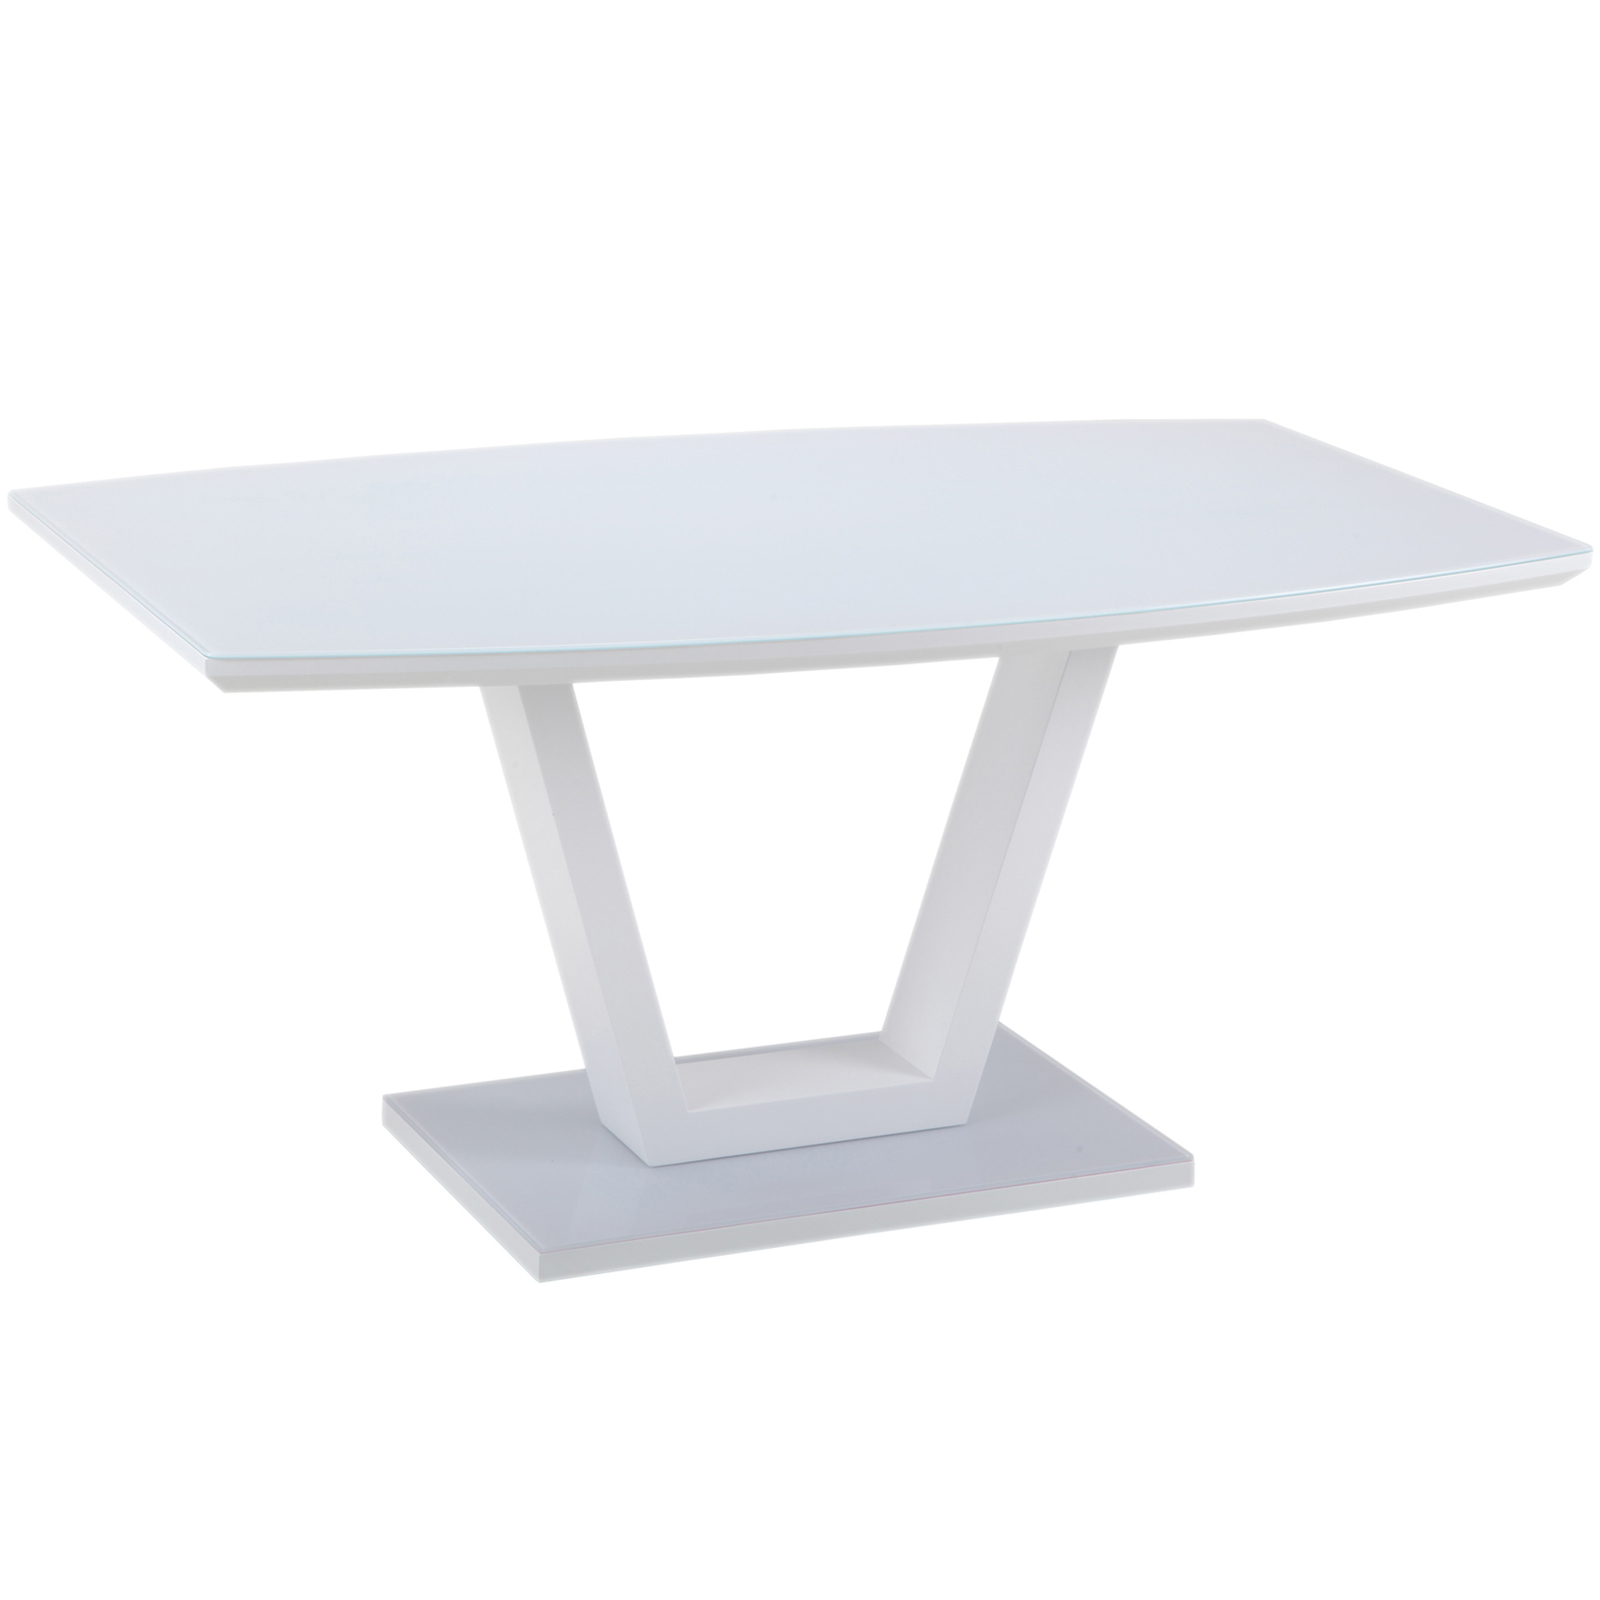 Grayson High Gloss Dining Table, White